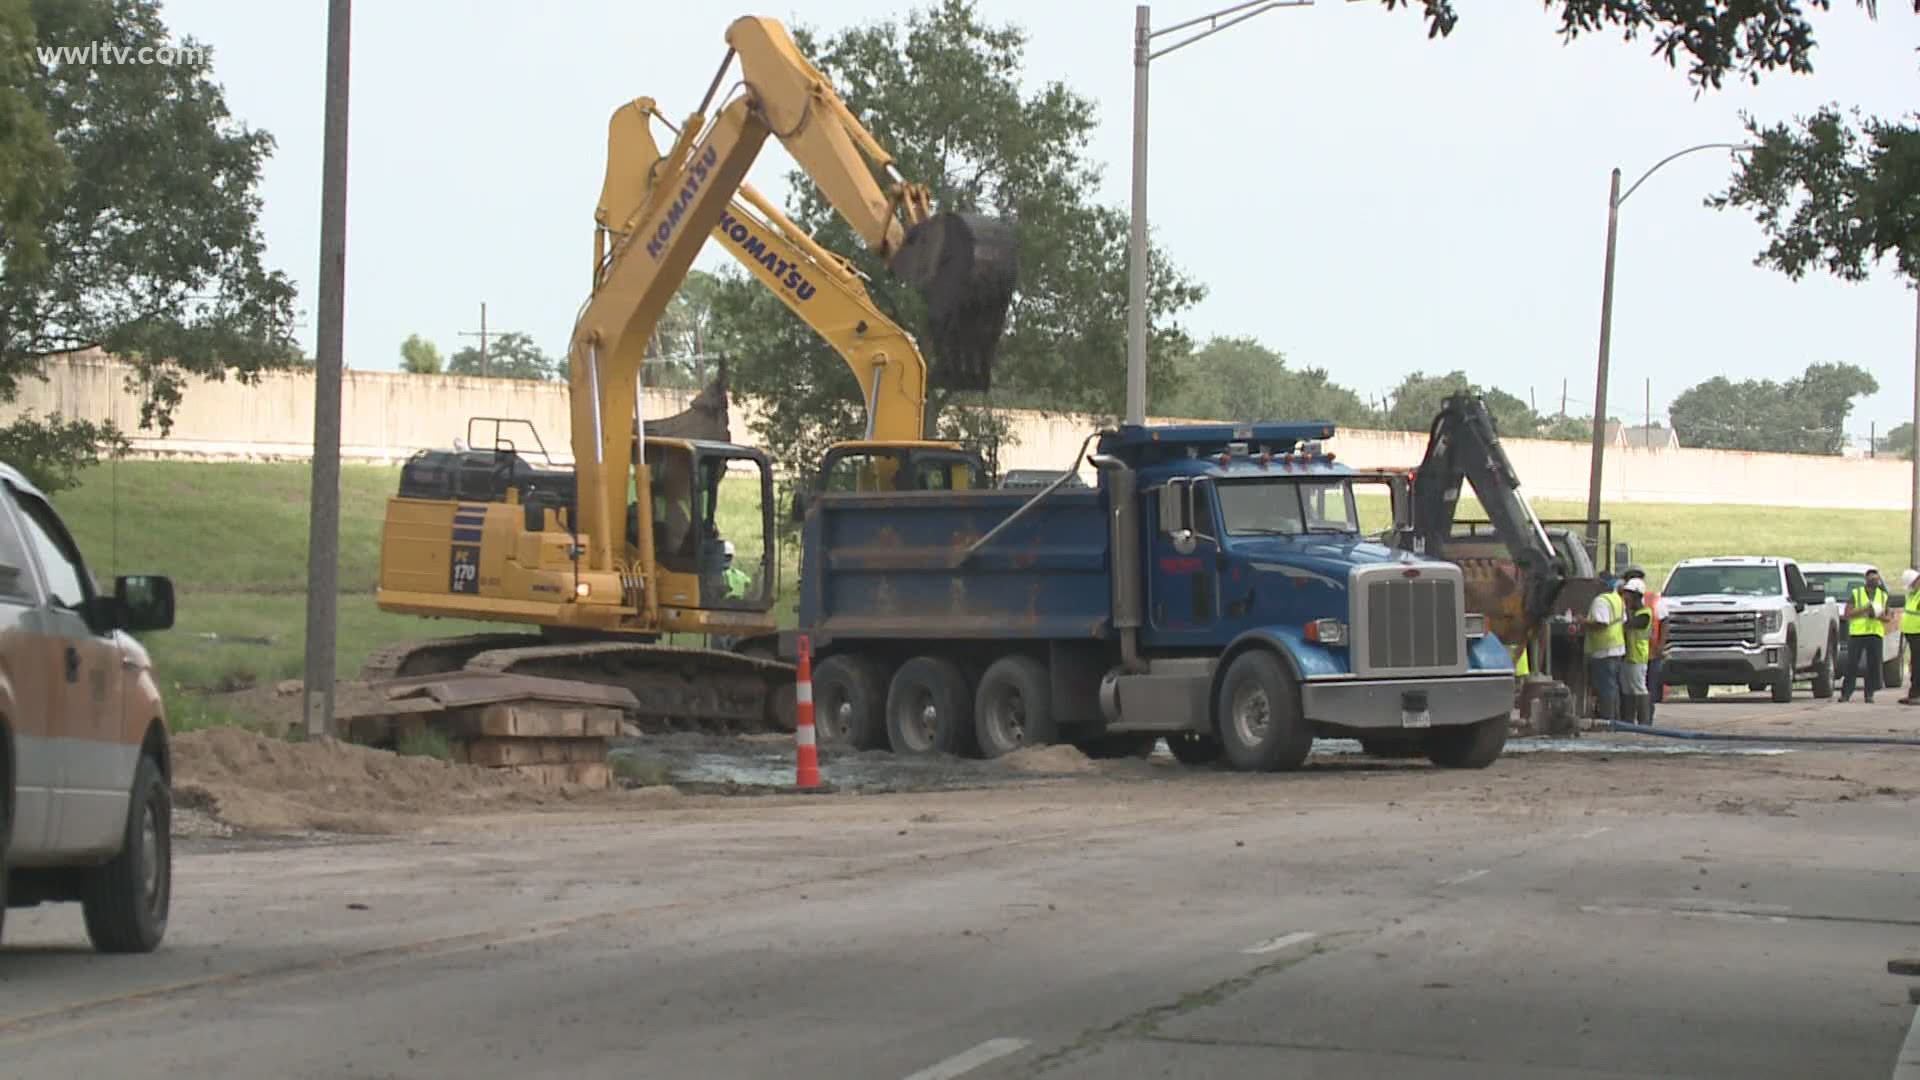 A water main that is being repaired at the Orleans Avenue canal will take more work than originally thought.